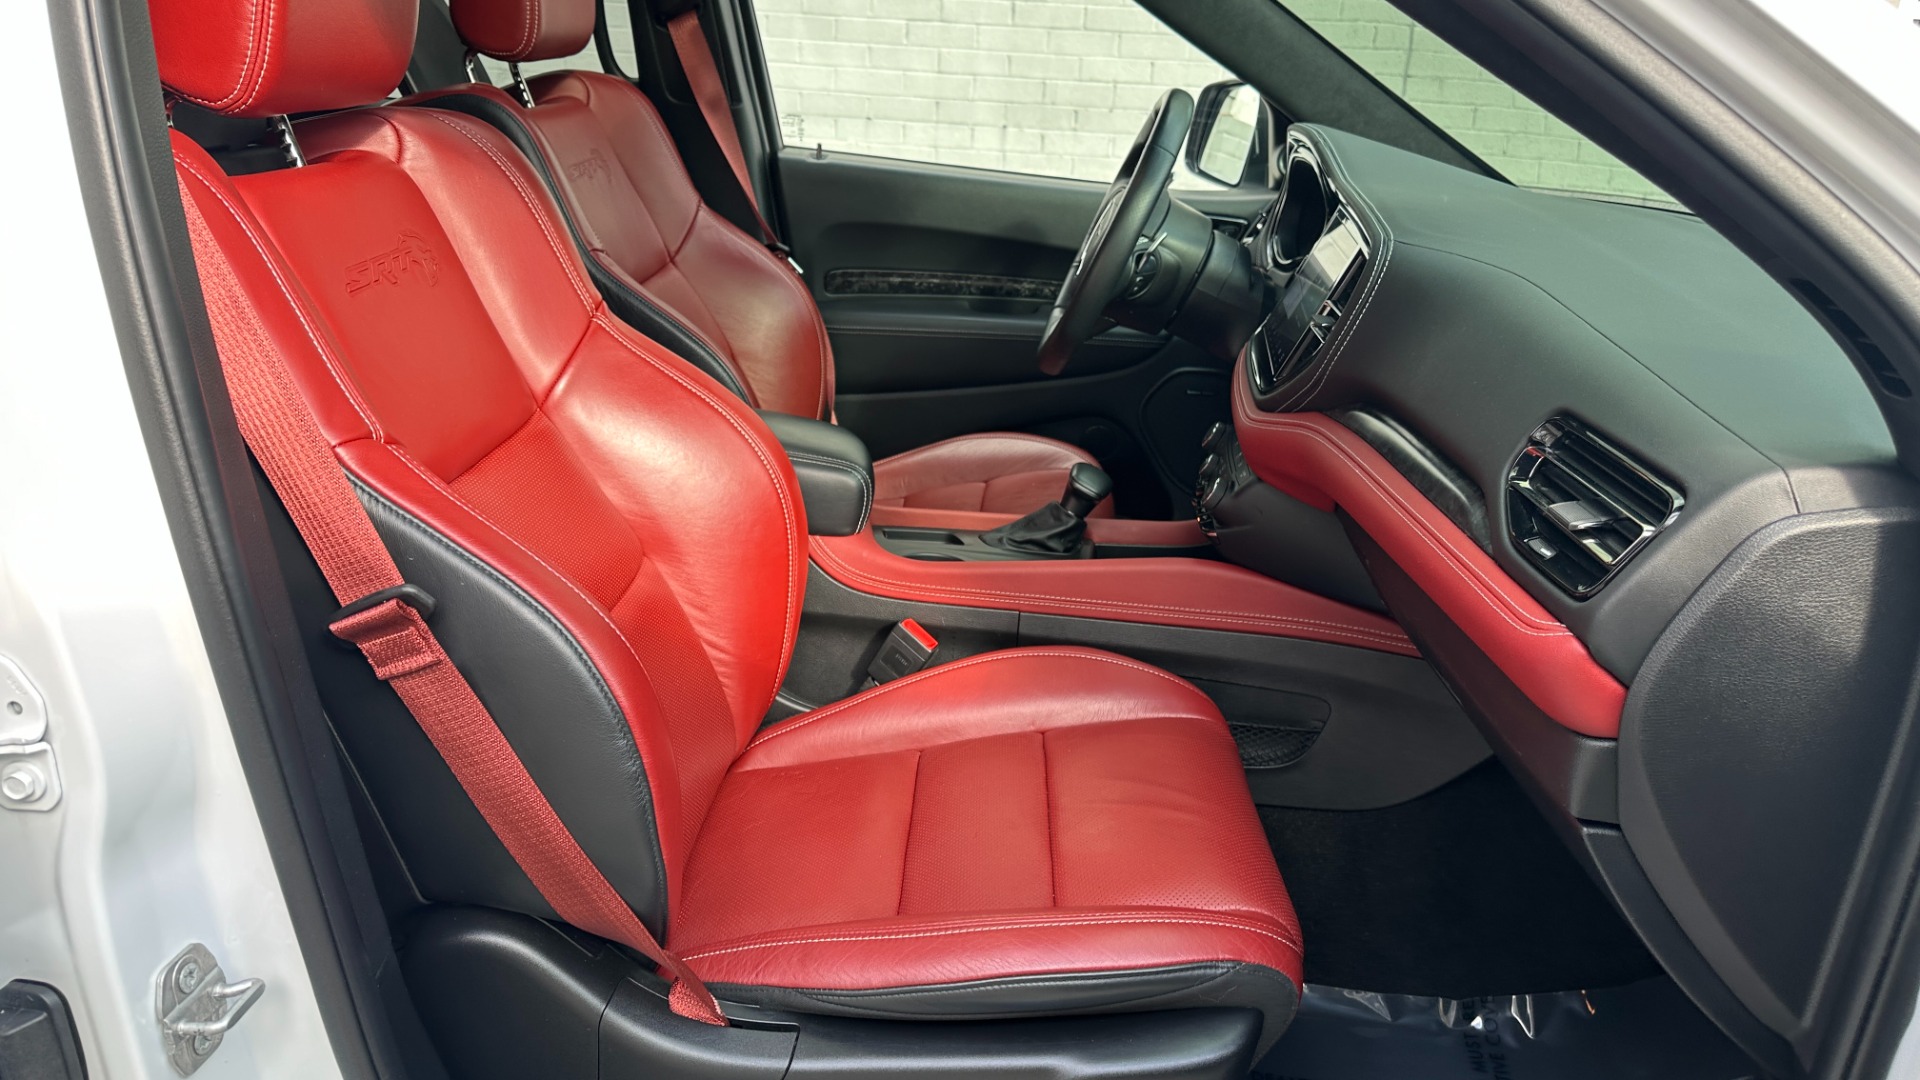 Used 2021 Dodge Durango SRT HELLCAT / CAPTAIN CHAIRS / DVD SCREENS / INTAKE / PULLEY for sale $98,495 at Formula Imports in Charlotte NC 28227 40